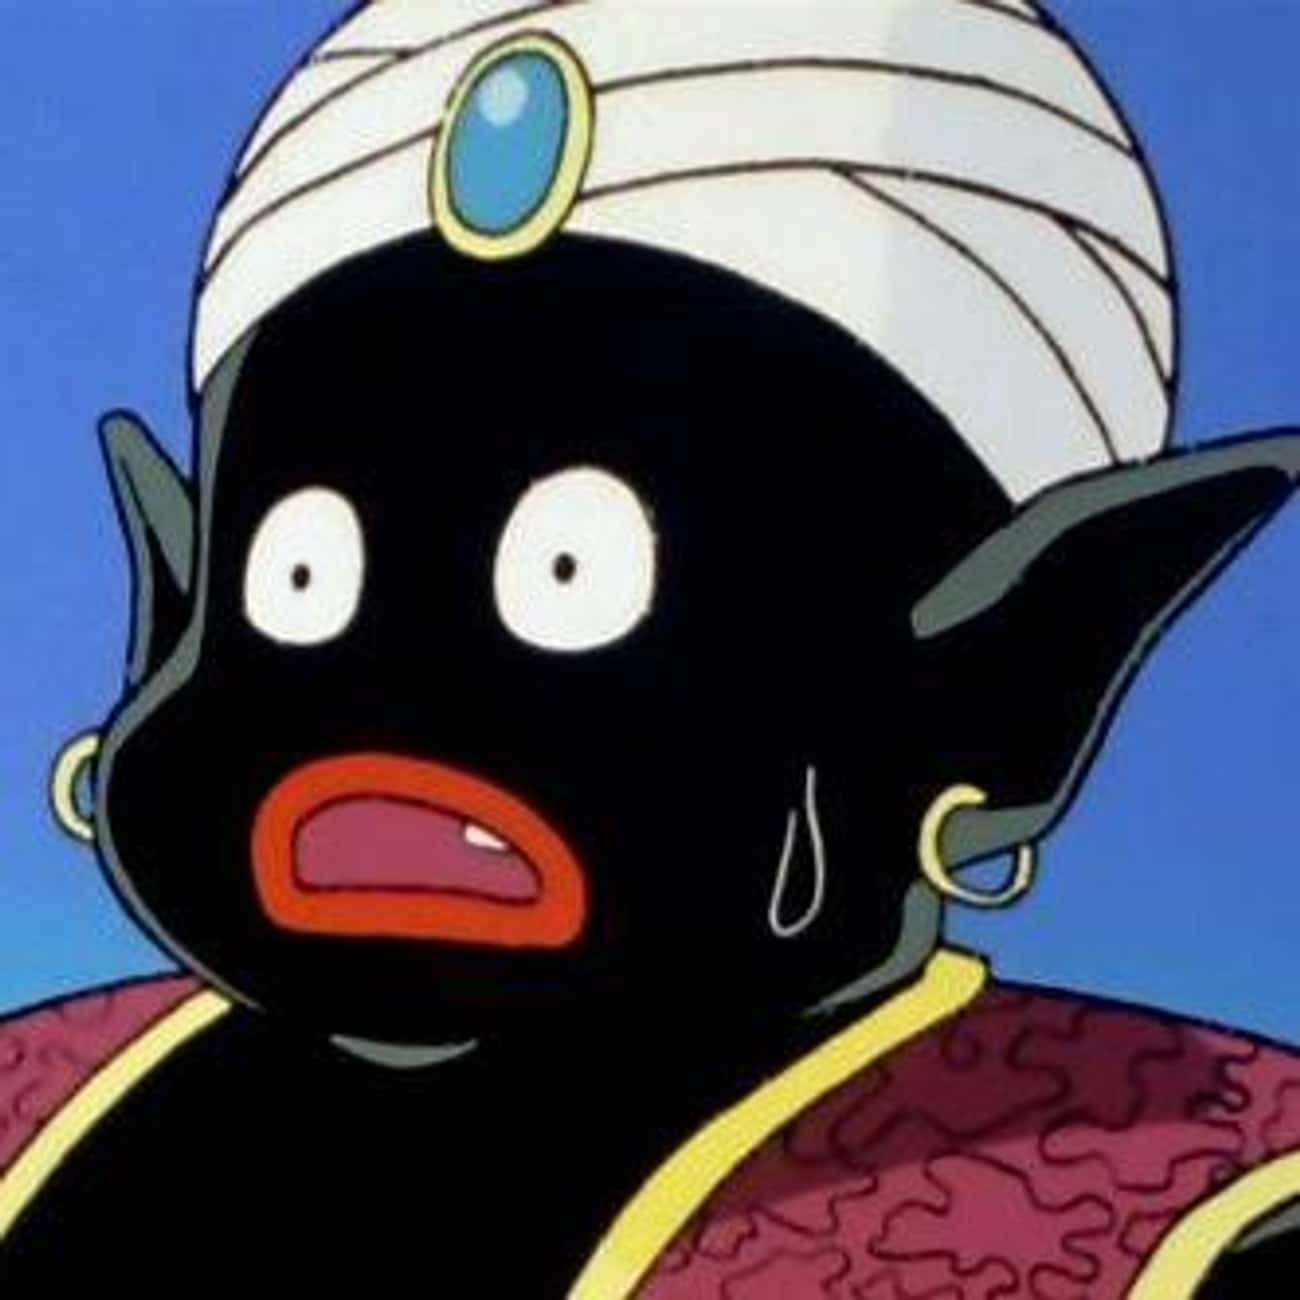 The Apparent Racism Of Mr. Popo